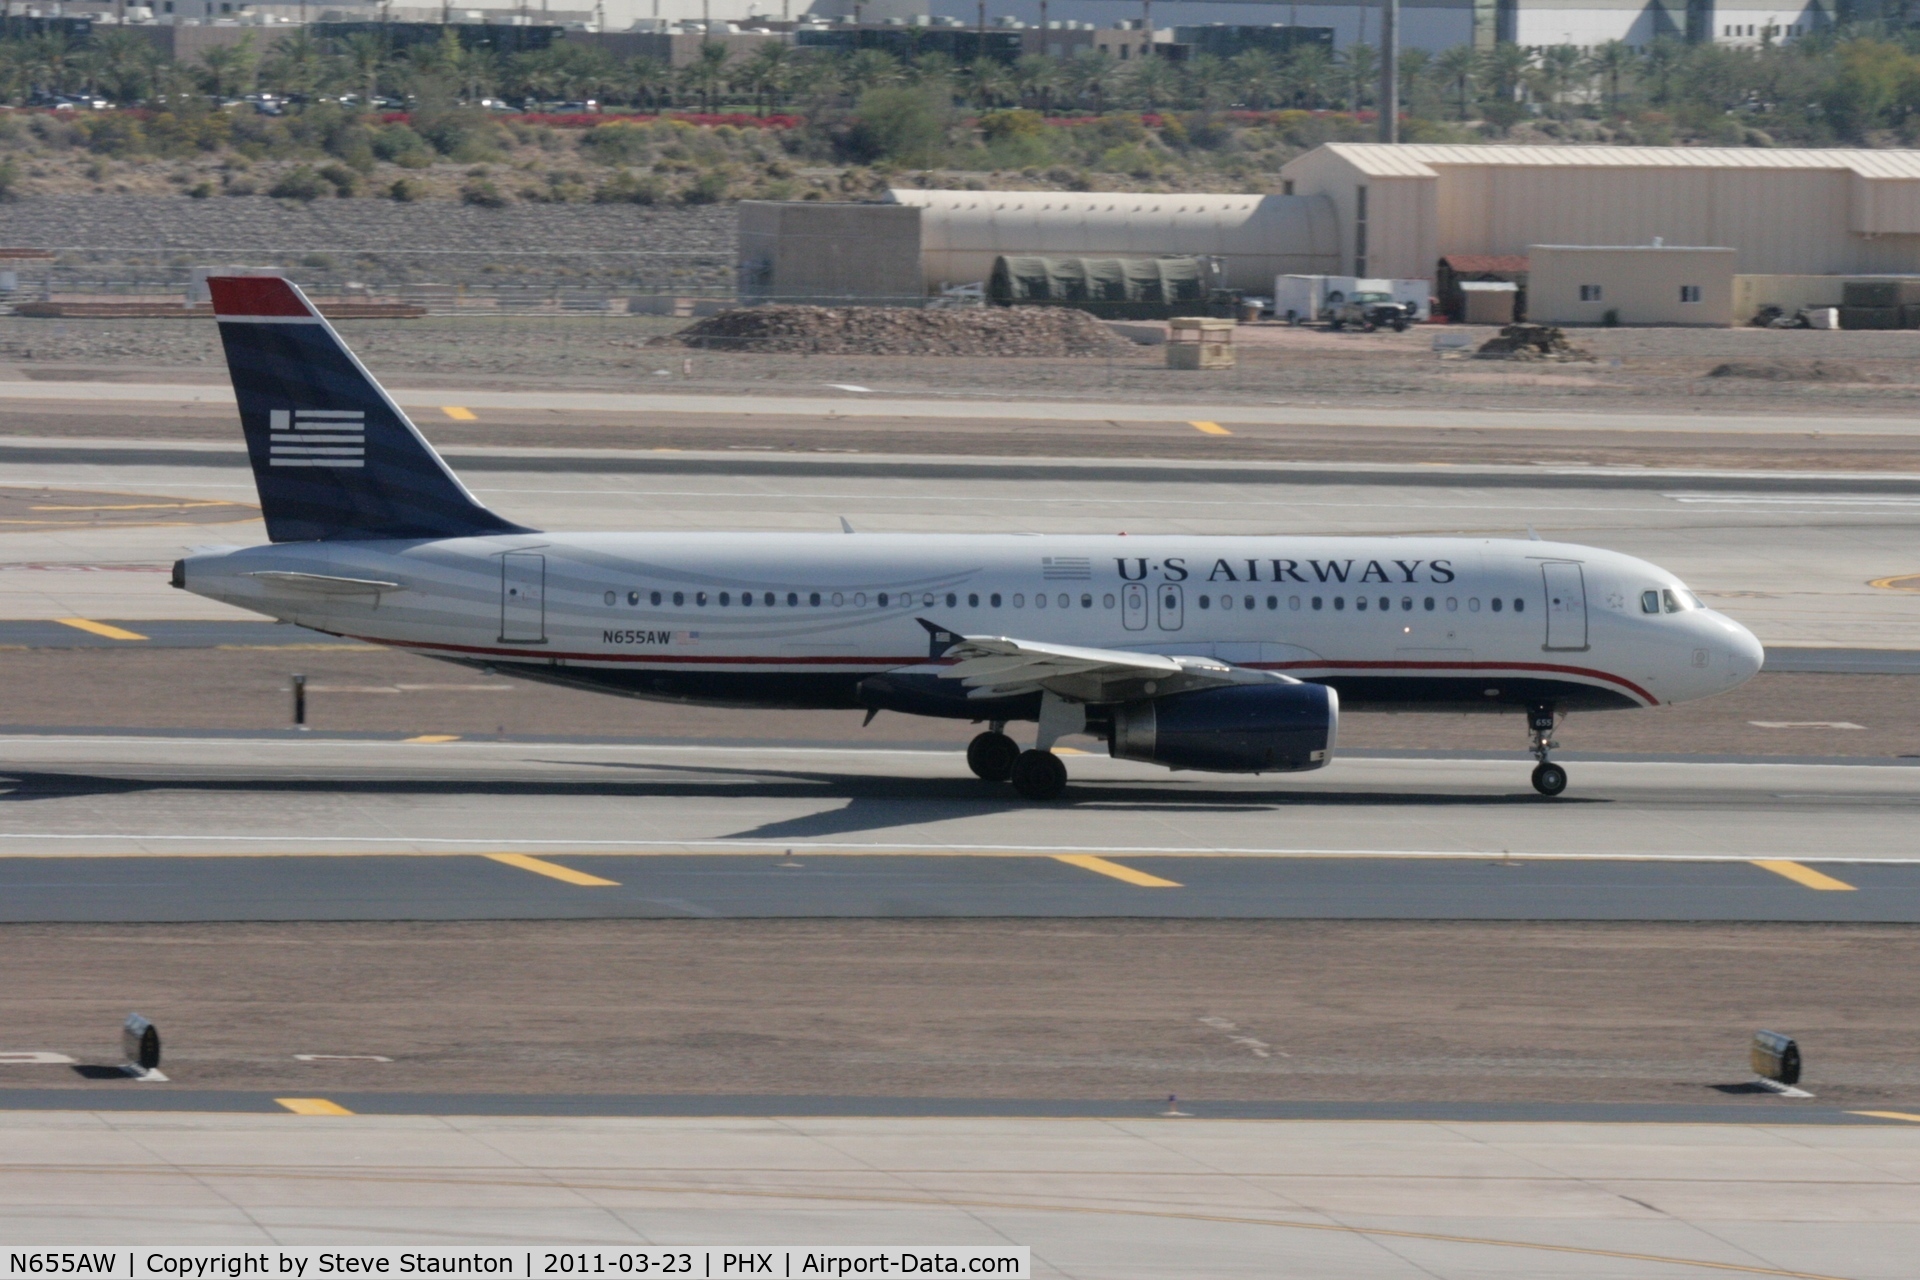 N655AW, 1999 Airbus A320-232 C/N 1075, Taken at Phoenix Sky Harbor Airport, in March 2011 whilst on an Aeroprint Aviation tour